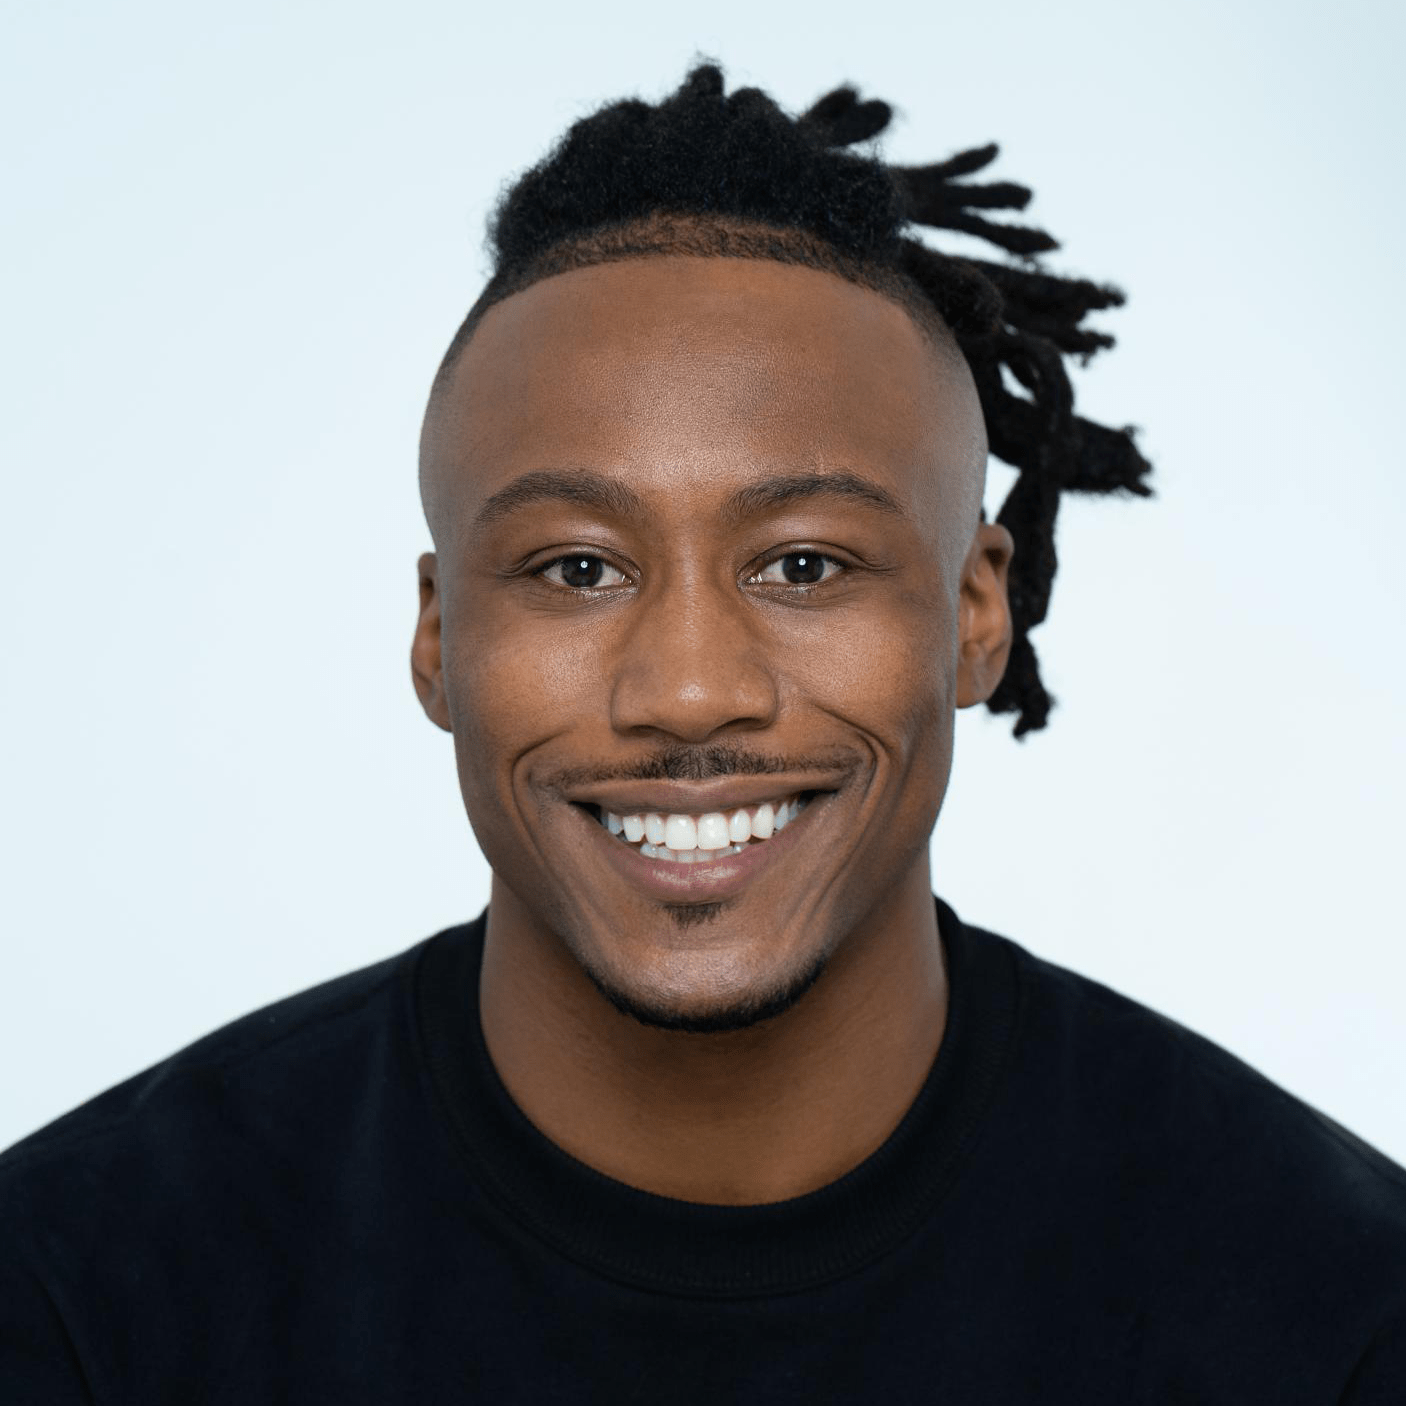 PODCAST | Building a Daily Routine, Improving Mental Health, and the 5 Pillars of Success with Brandon Marshall, Former NFL Star & Founder of House of Athlete.